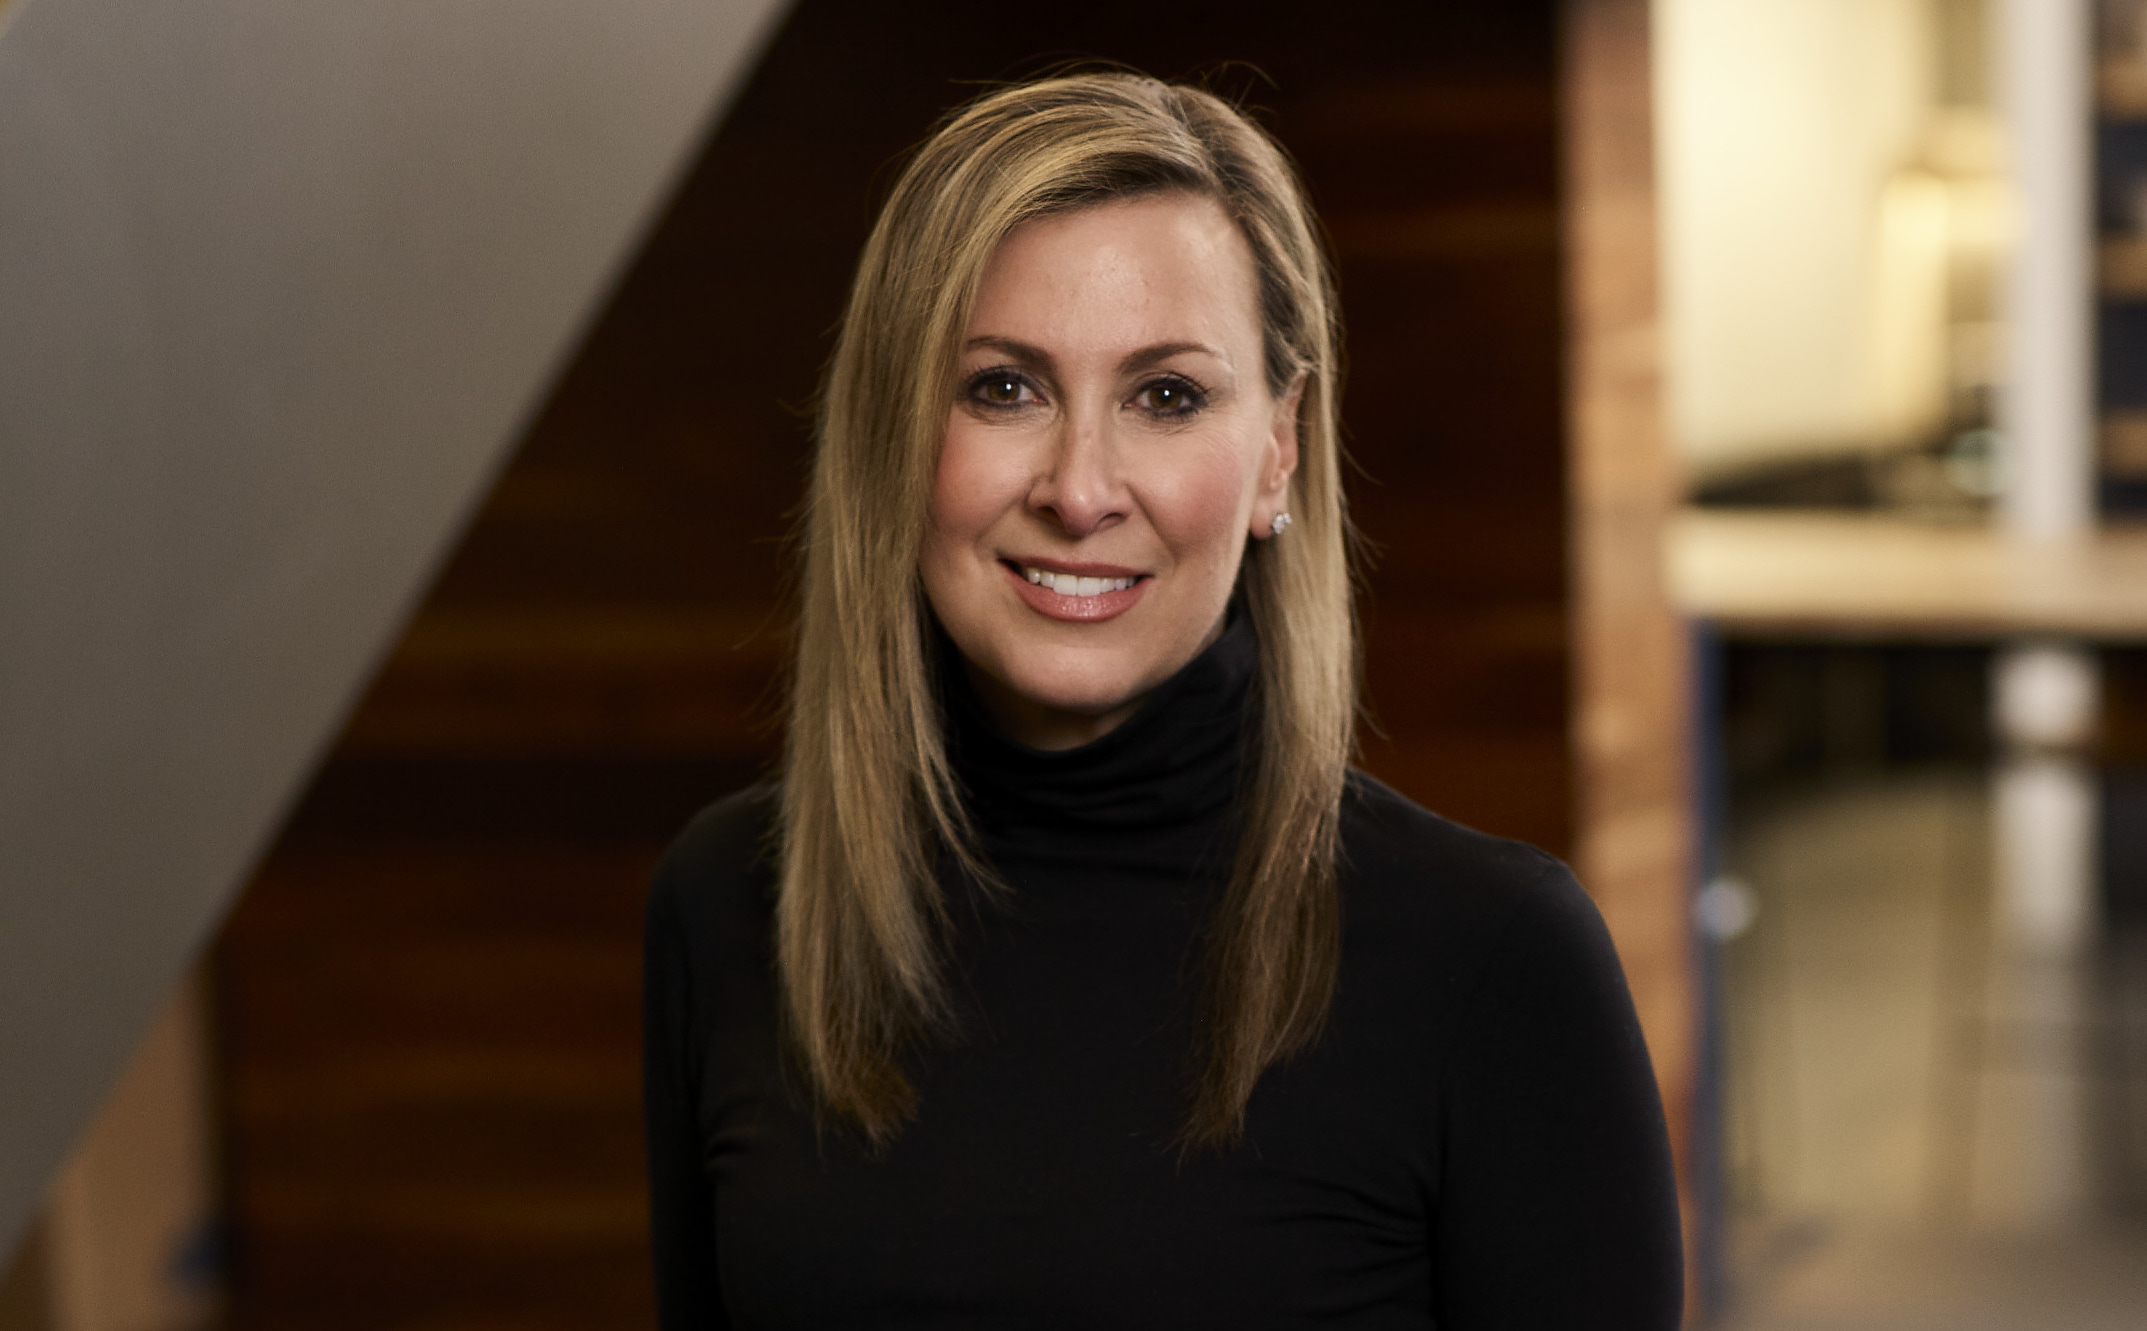 Fossil Group, Inc. Appoints Gail B. Tifford to Its Board of Directors